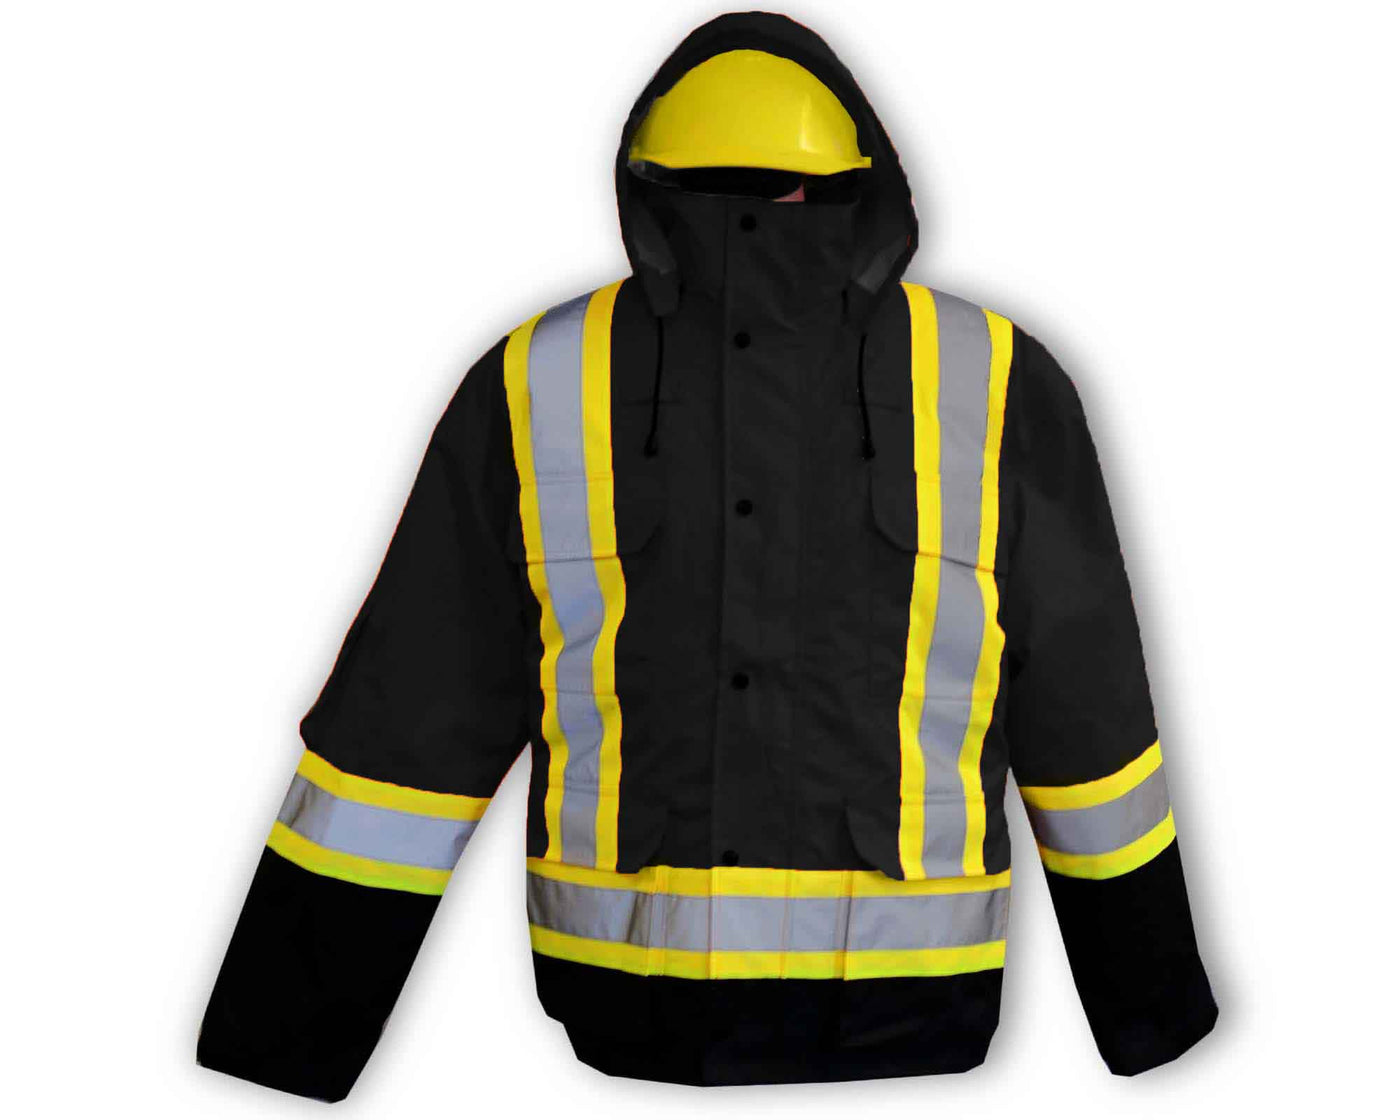 Black Winter Jacket for Construction Workers with Hi-Vis reflective stripes